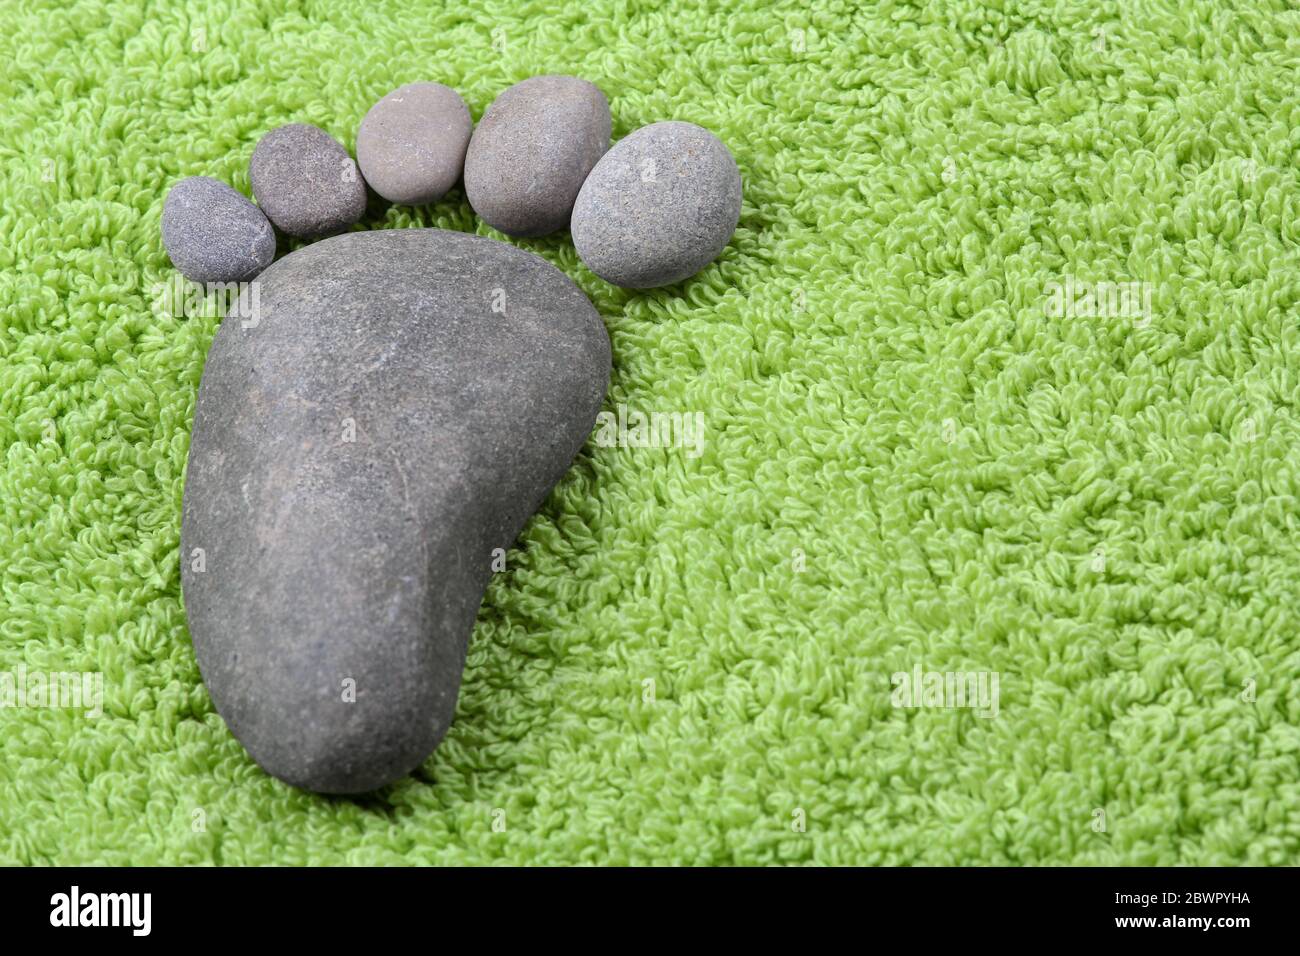 Foot symbol on green terry towel Stock Photo